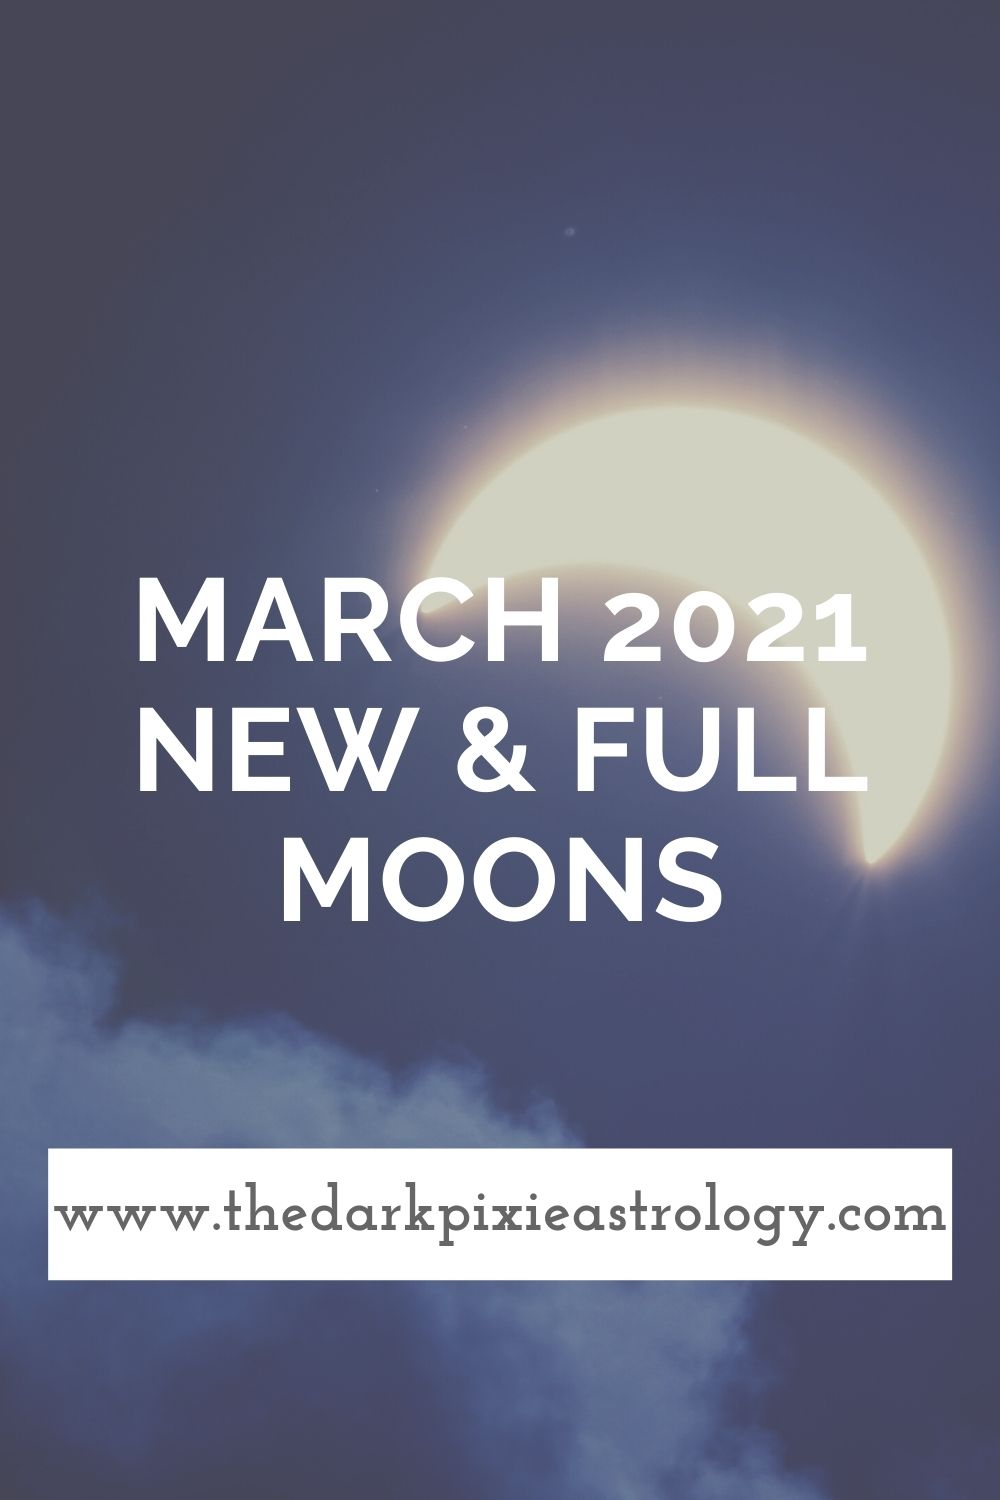 March 2021 New & Full Moons: New Moon in Pisces & Full Moon in Libra - The Dark Pixie Astrology